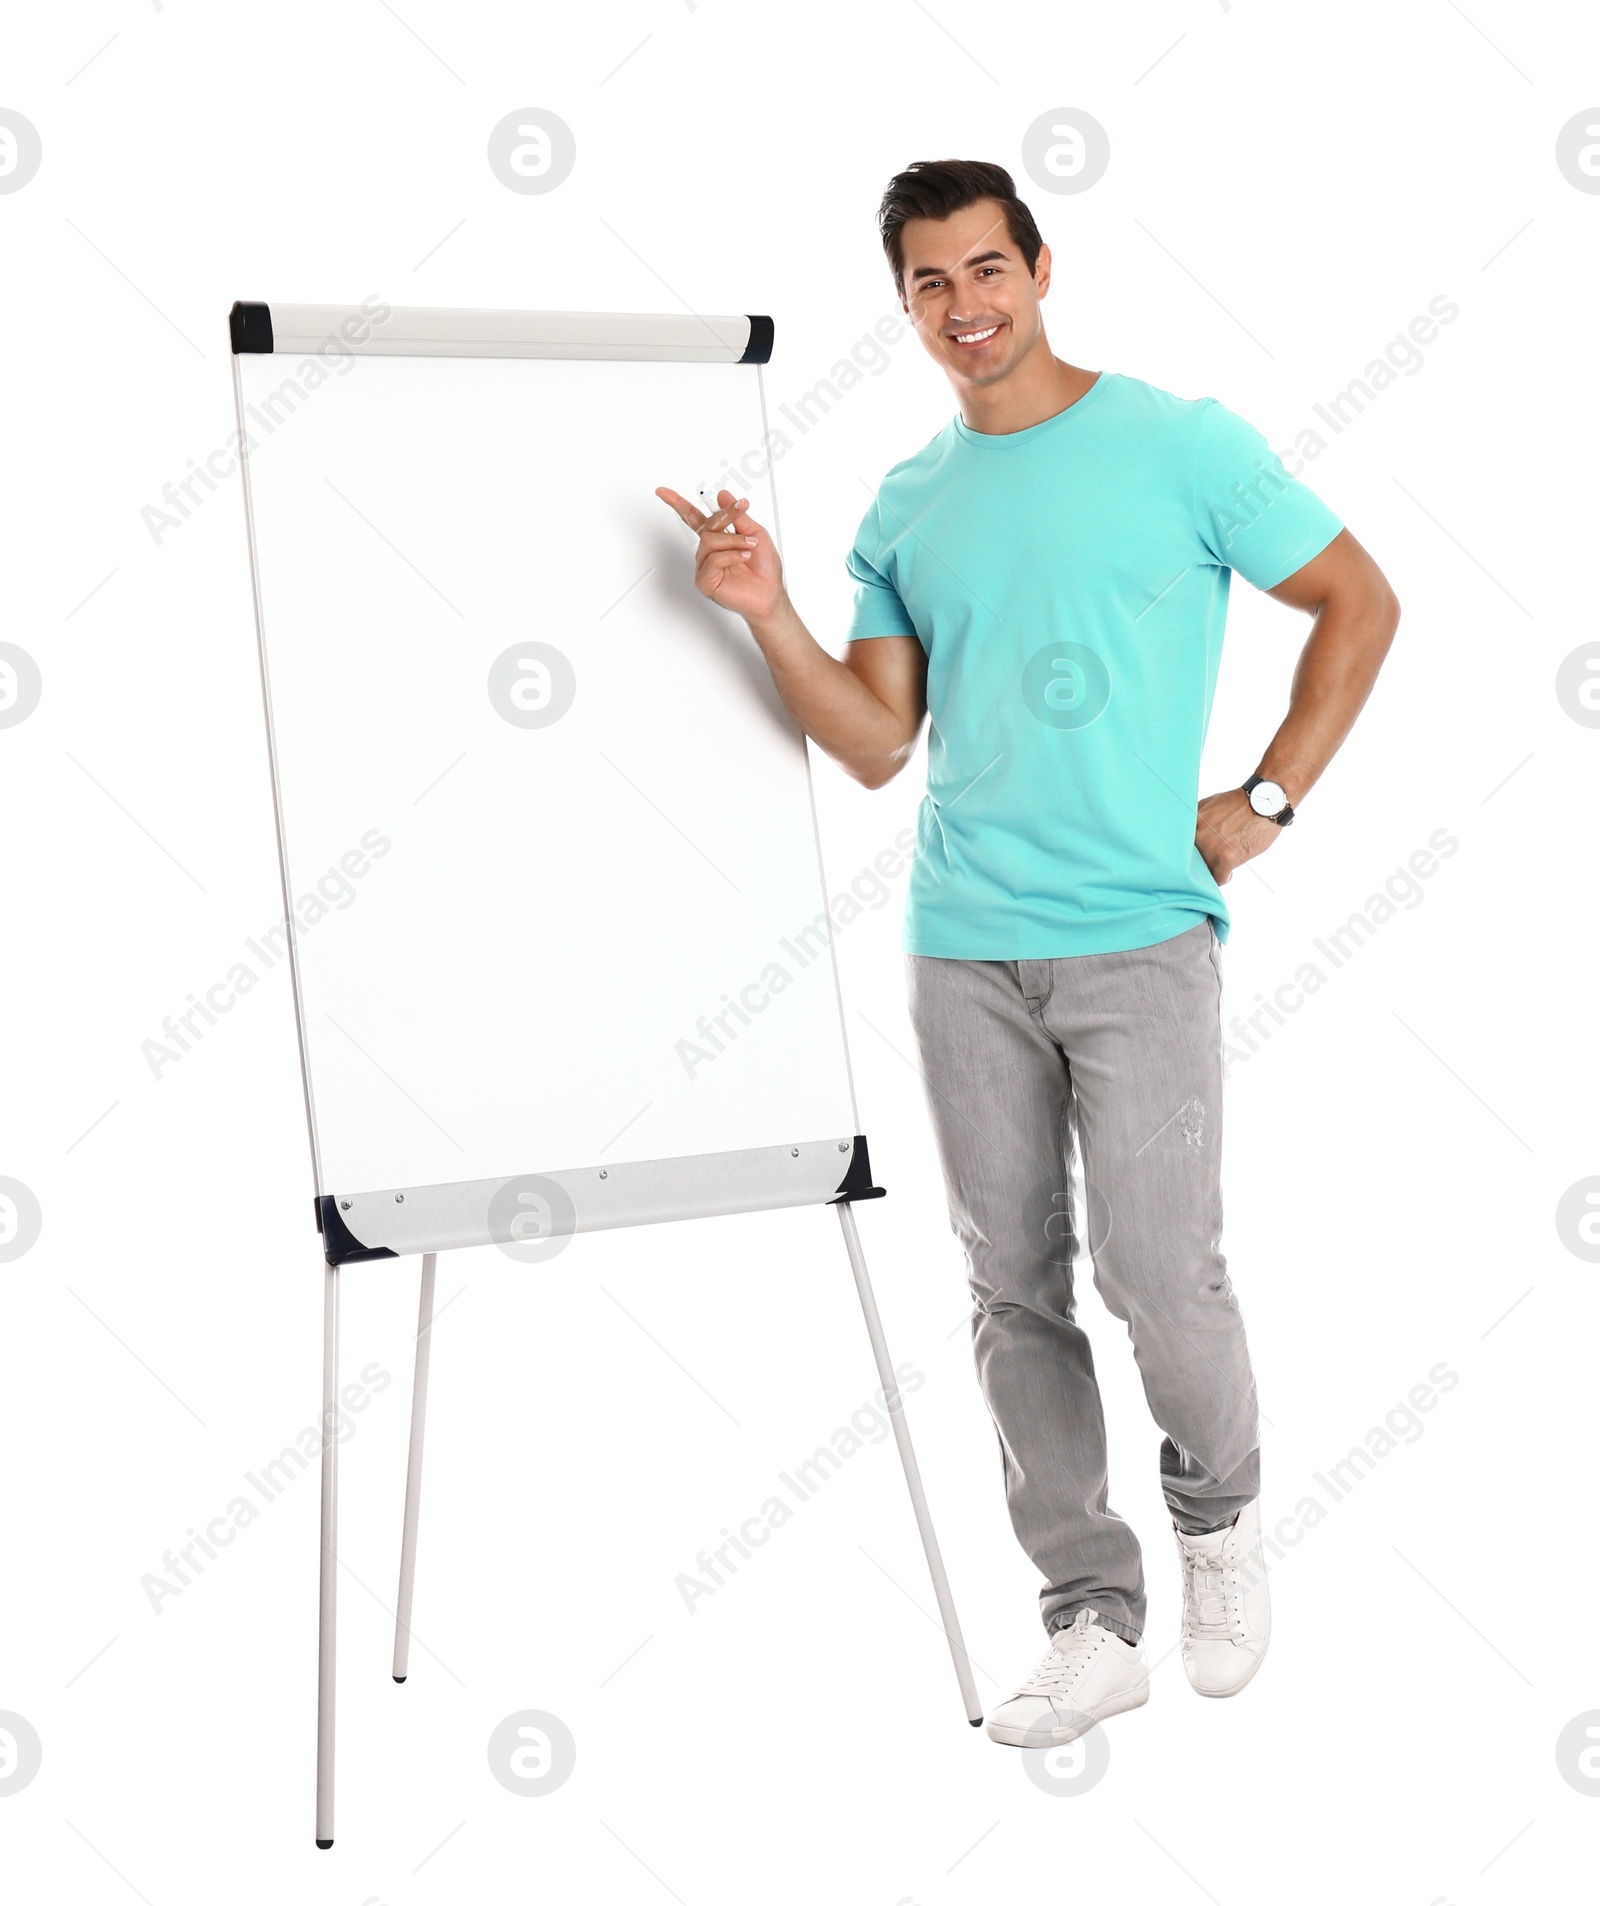 Photo of Professional business trainer near flip chart on white background